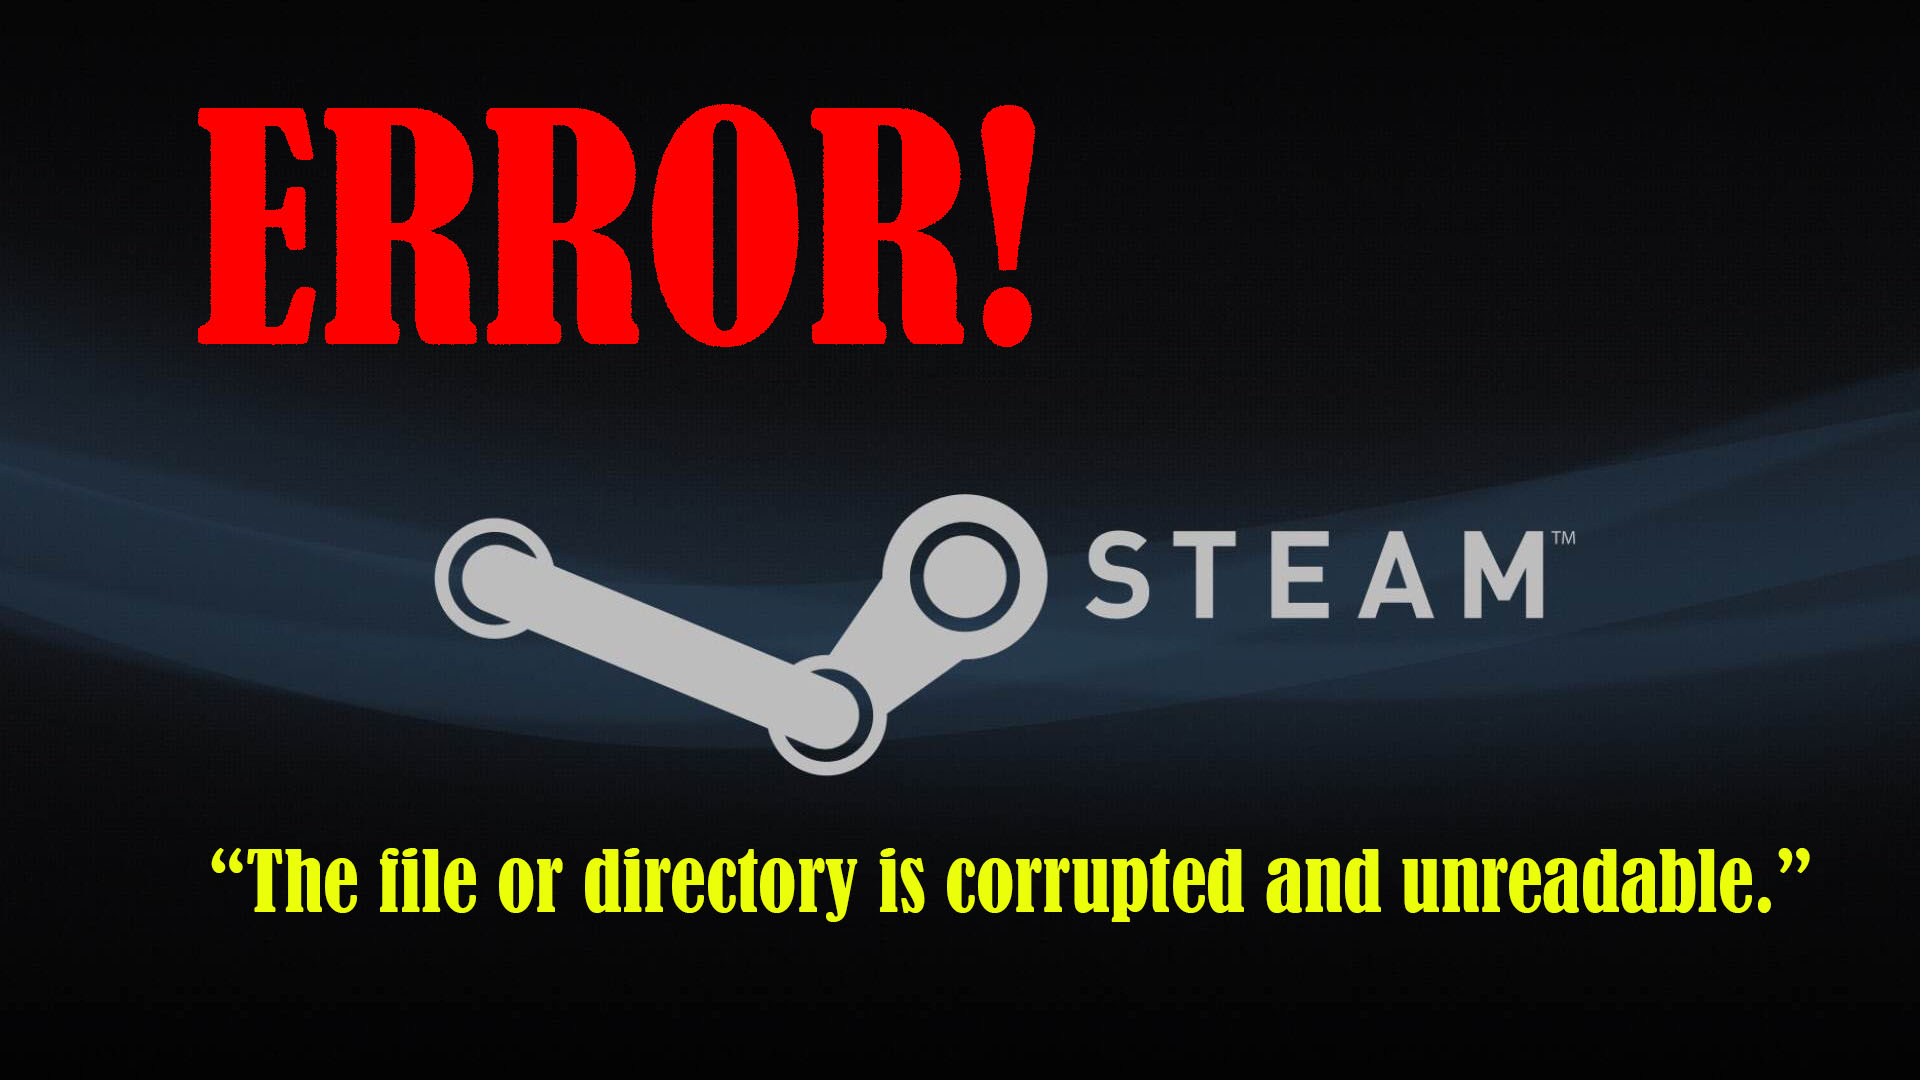 Стим фикс. Error file is corrupt. Steam Fix. The file or Directory is corrupted and unreadable РОБЛОКС. Critical system files are corrupt roblox